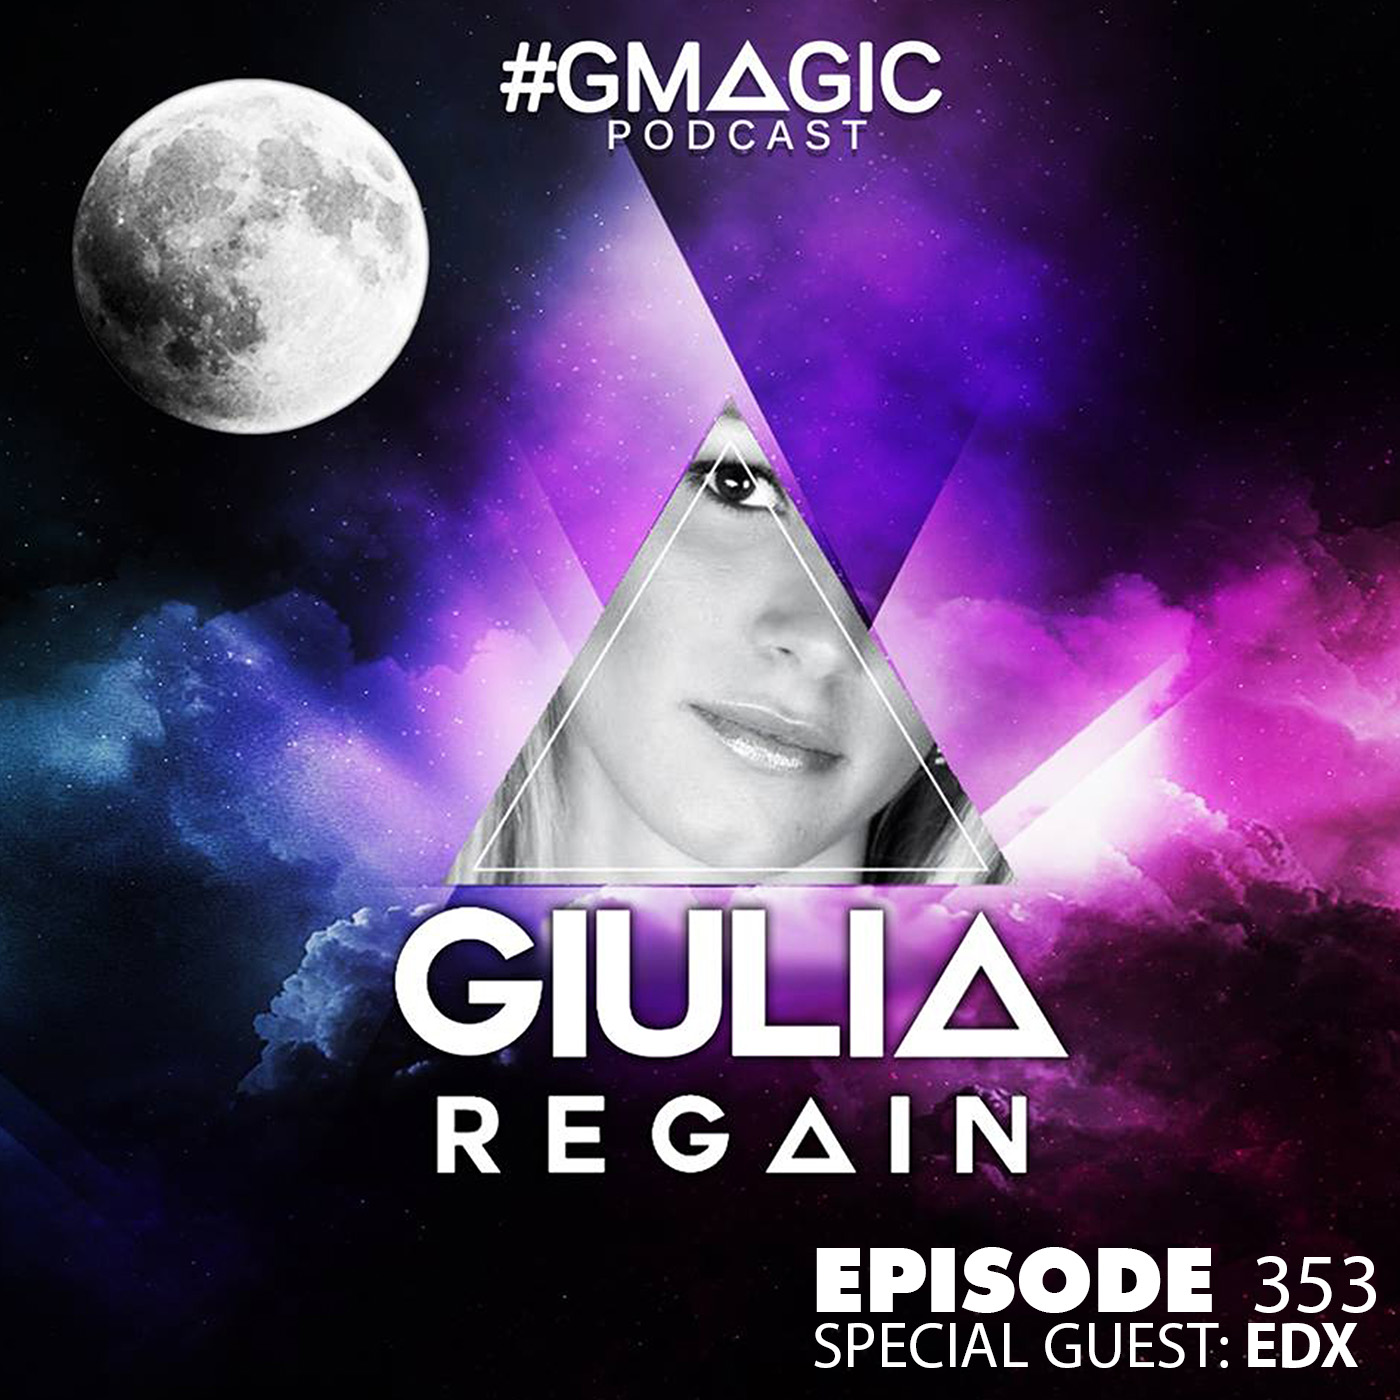 #Gmagic Podcast 353 - Special Guest: EDX